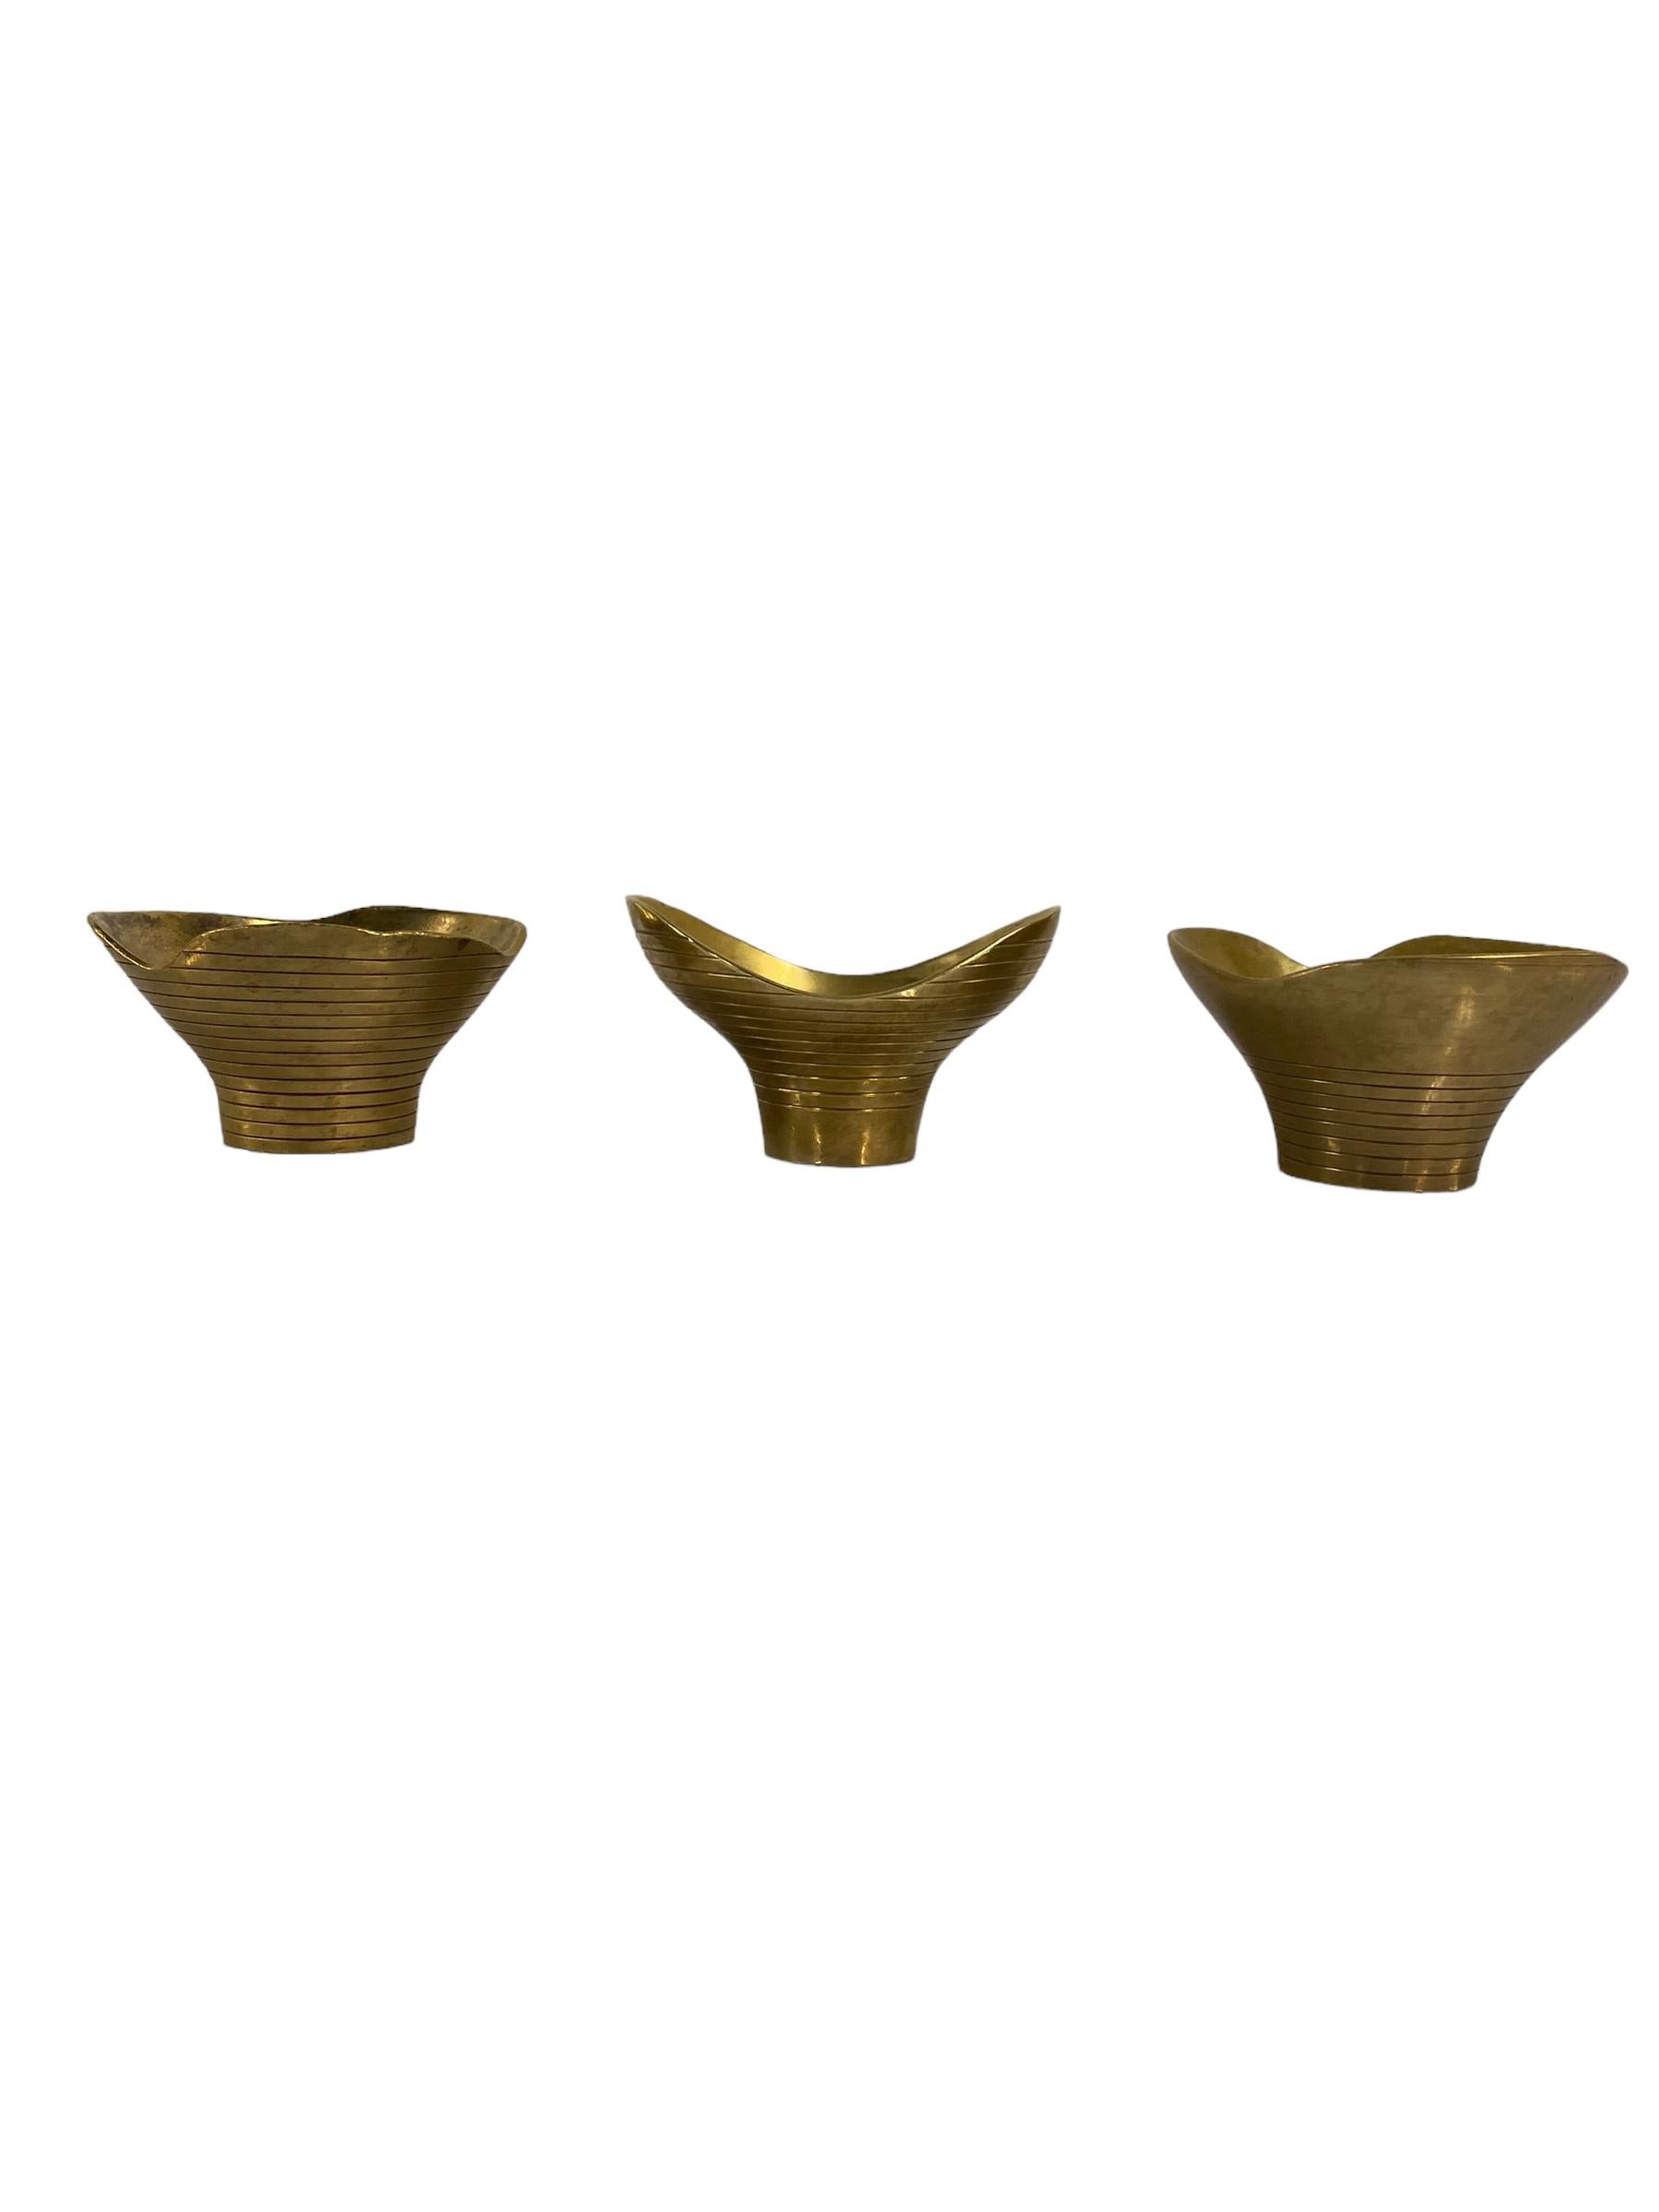 Mid-20th Century A Set of 3 Paavo & Helena Tynell Brass Bowl no. 4, Taito 1940s For Sale